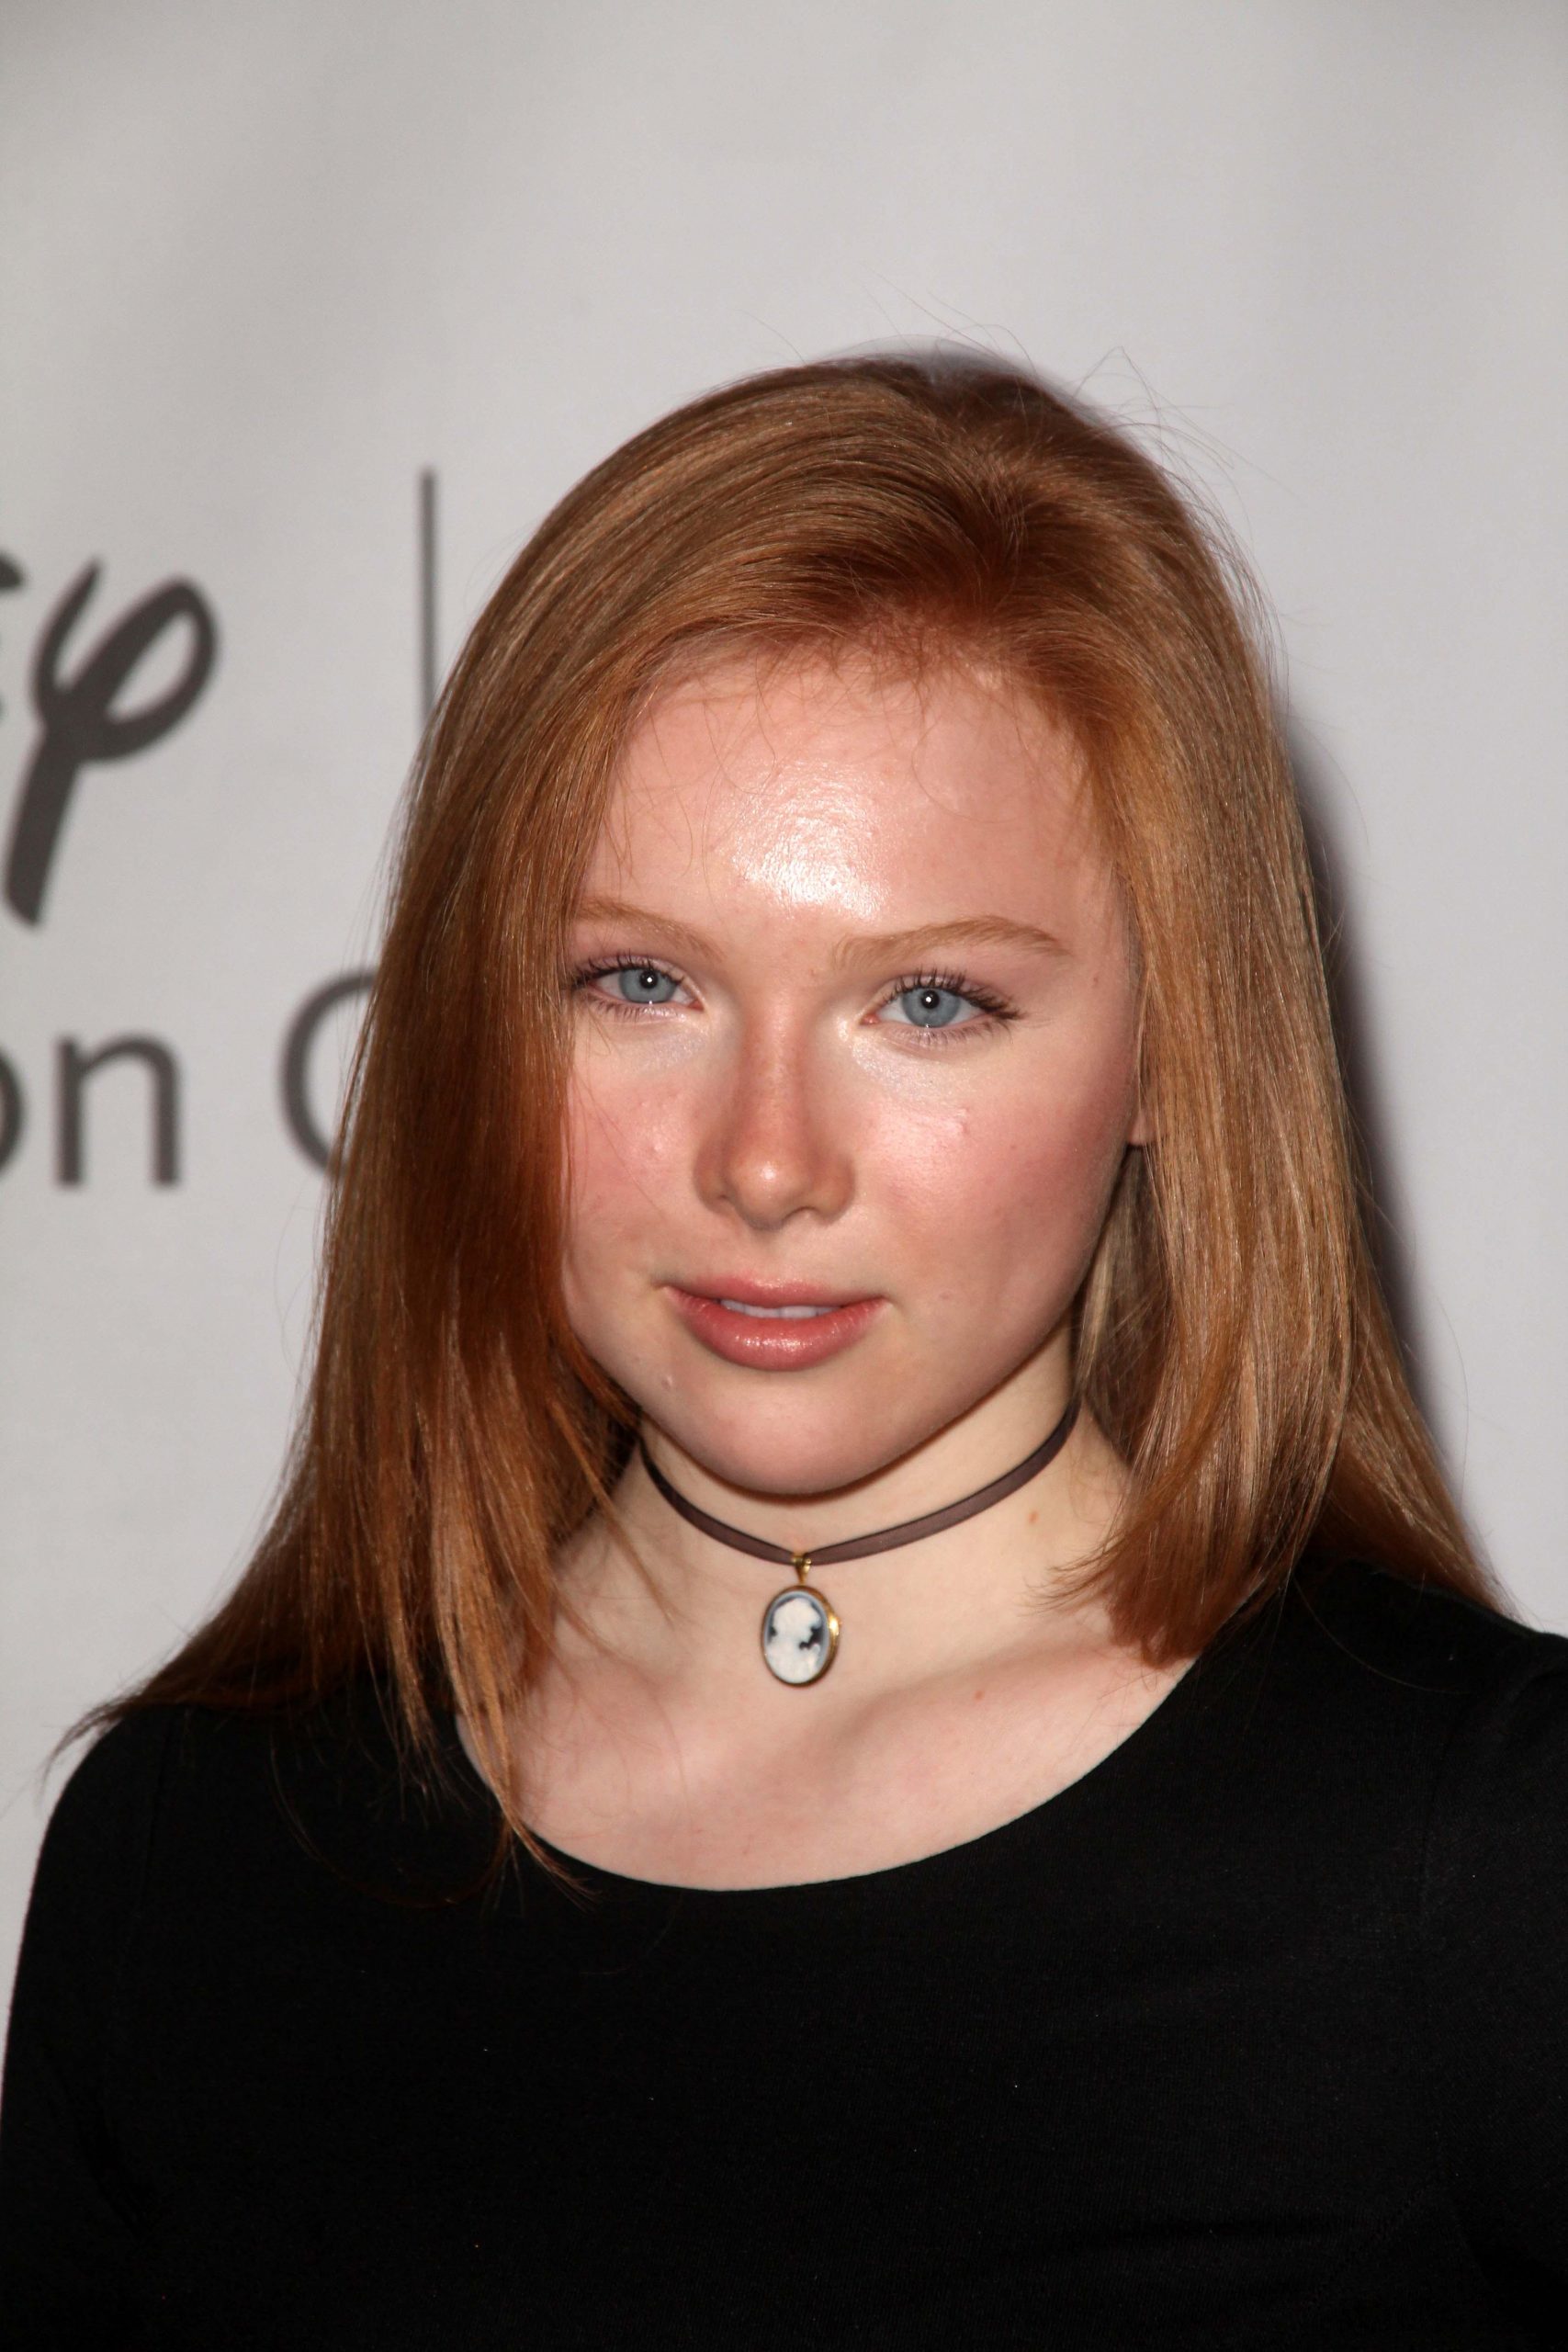 70+ Hot Pictures Of Molly C. Quinn Are God’s Gift For Her Die Hard Fans 152